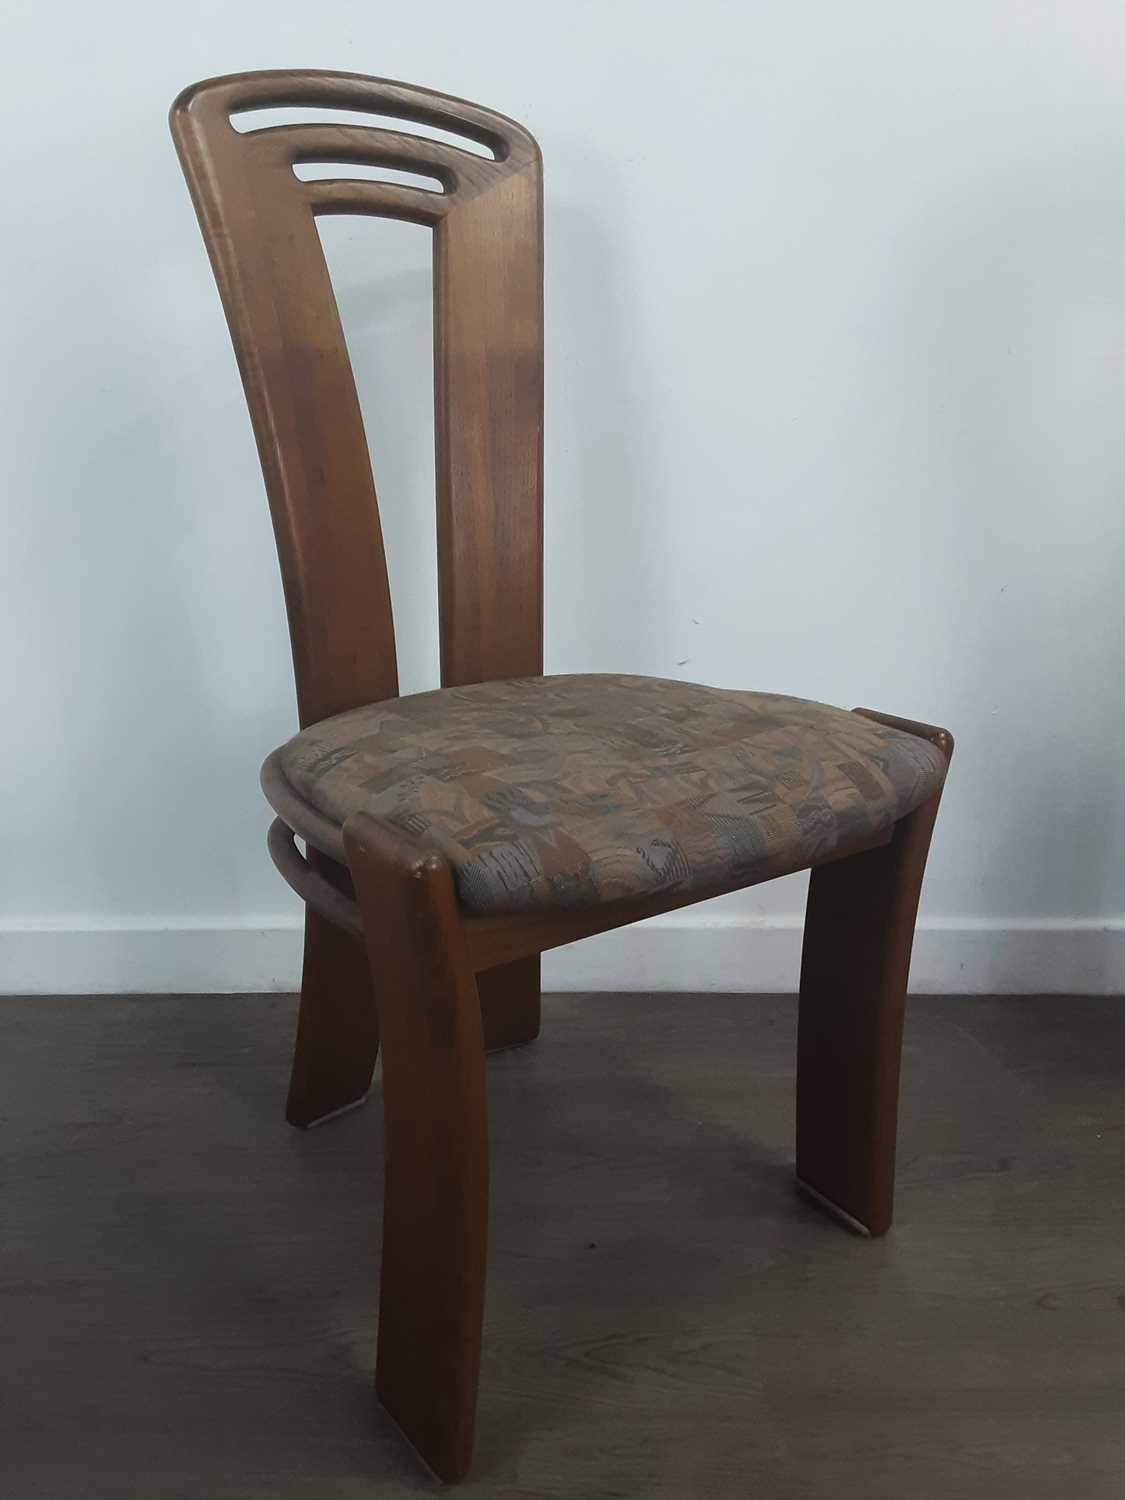 BOLTINGE OF DENMARK, SET OF SIX POST-MODERN TEAK DINING CHAIRS, CIRCA 1980s - Image 2 of 16